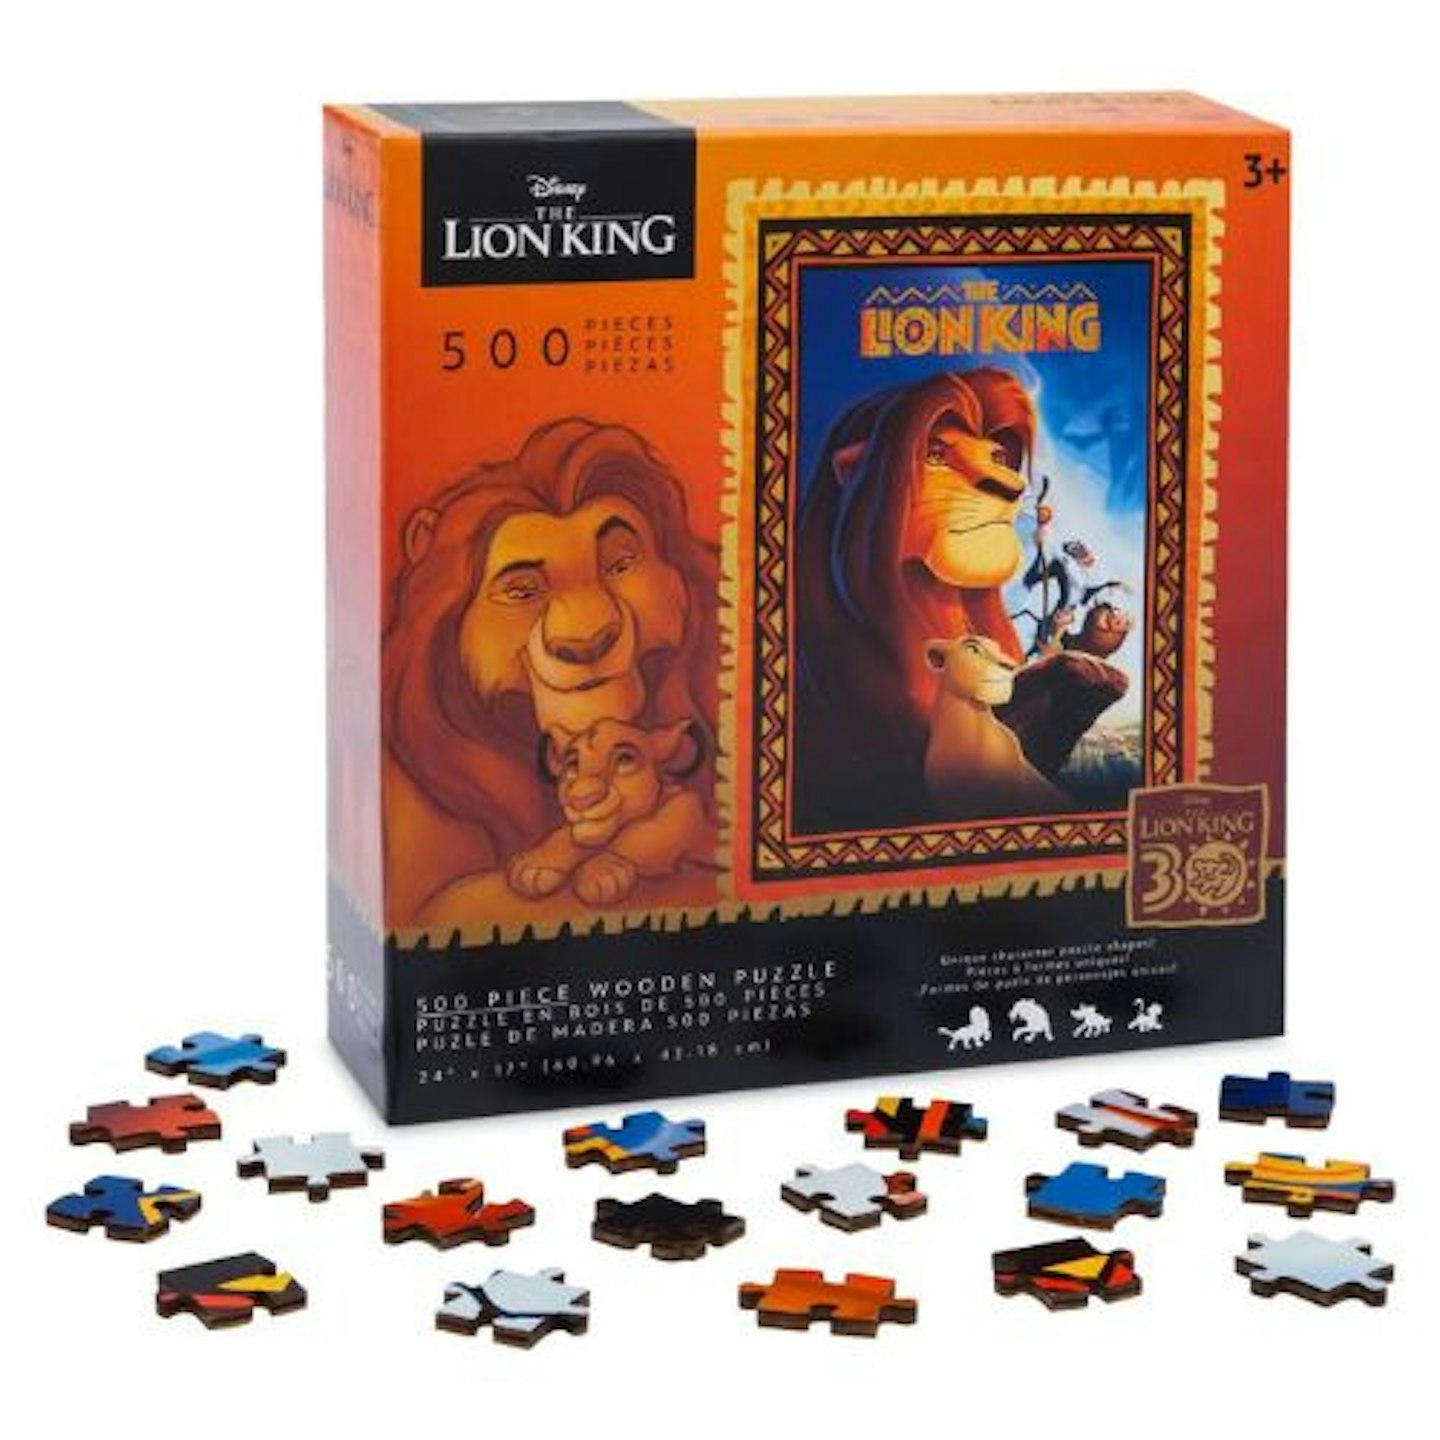 The Lion King 30th Anniversary 500 Piece Wooden Puzzle